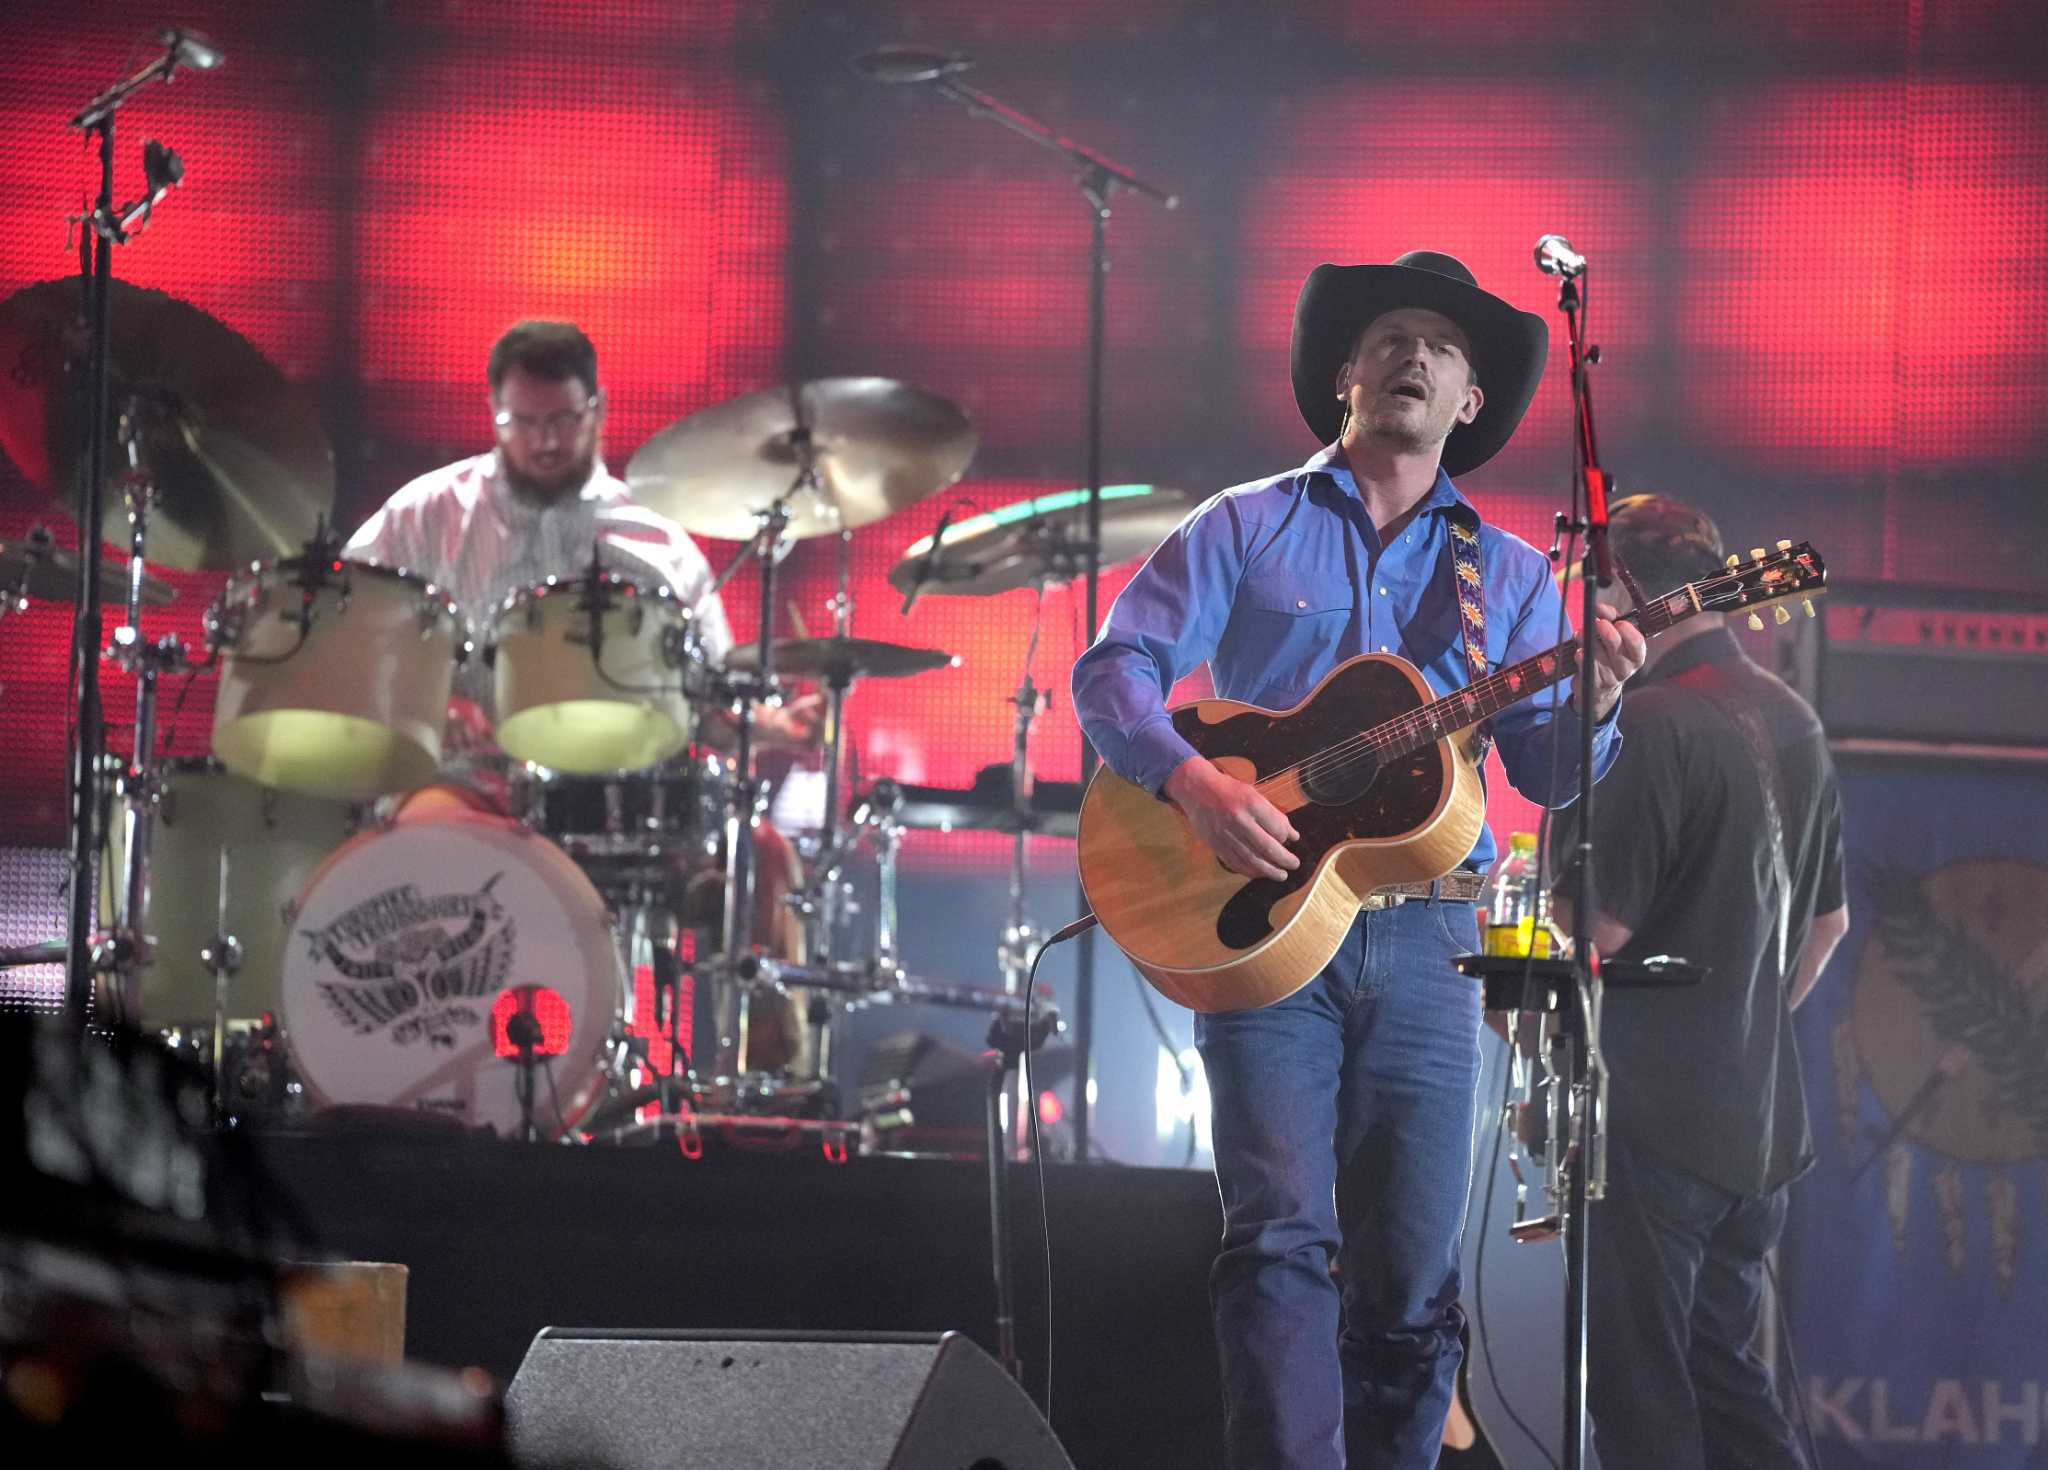 Turnpike Troubadours at Houston Rodeo Biggest, best so far this year